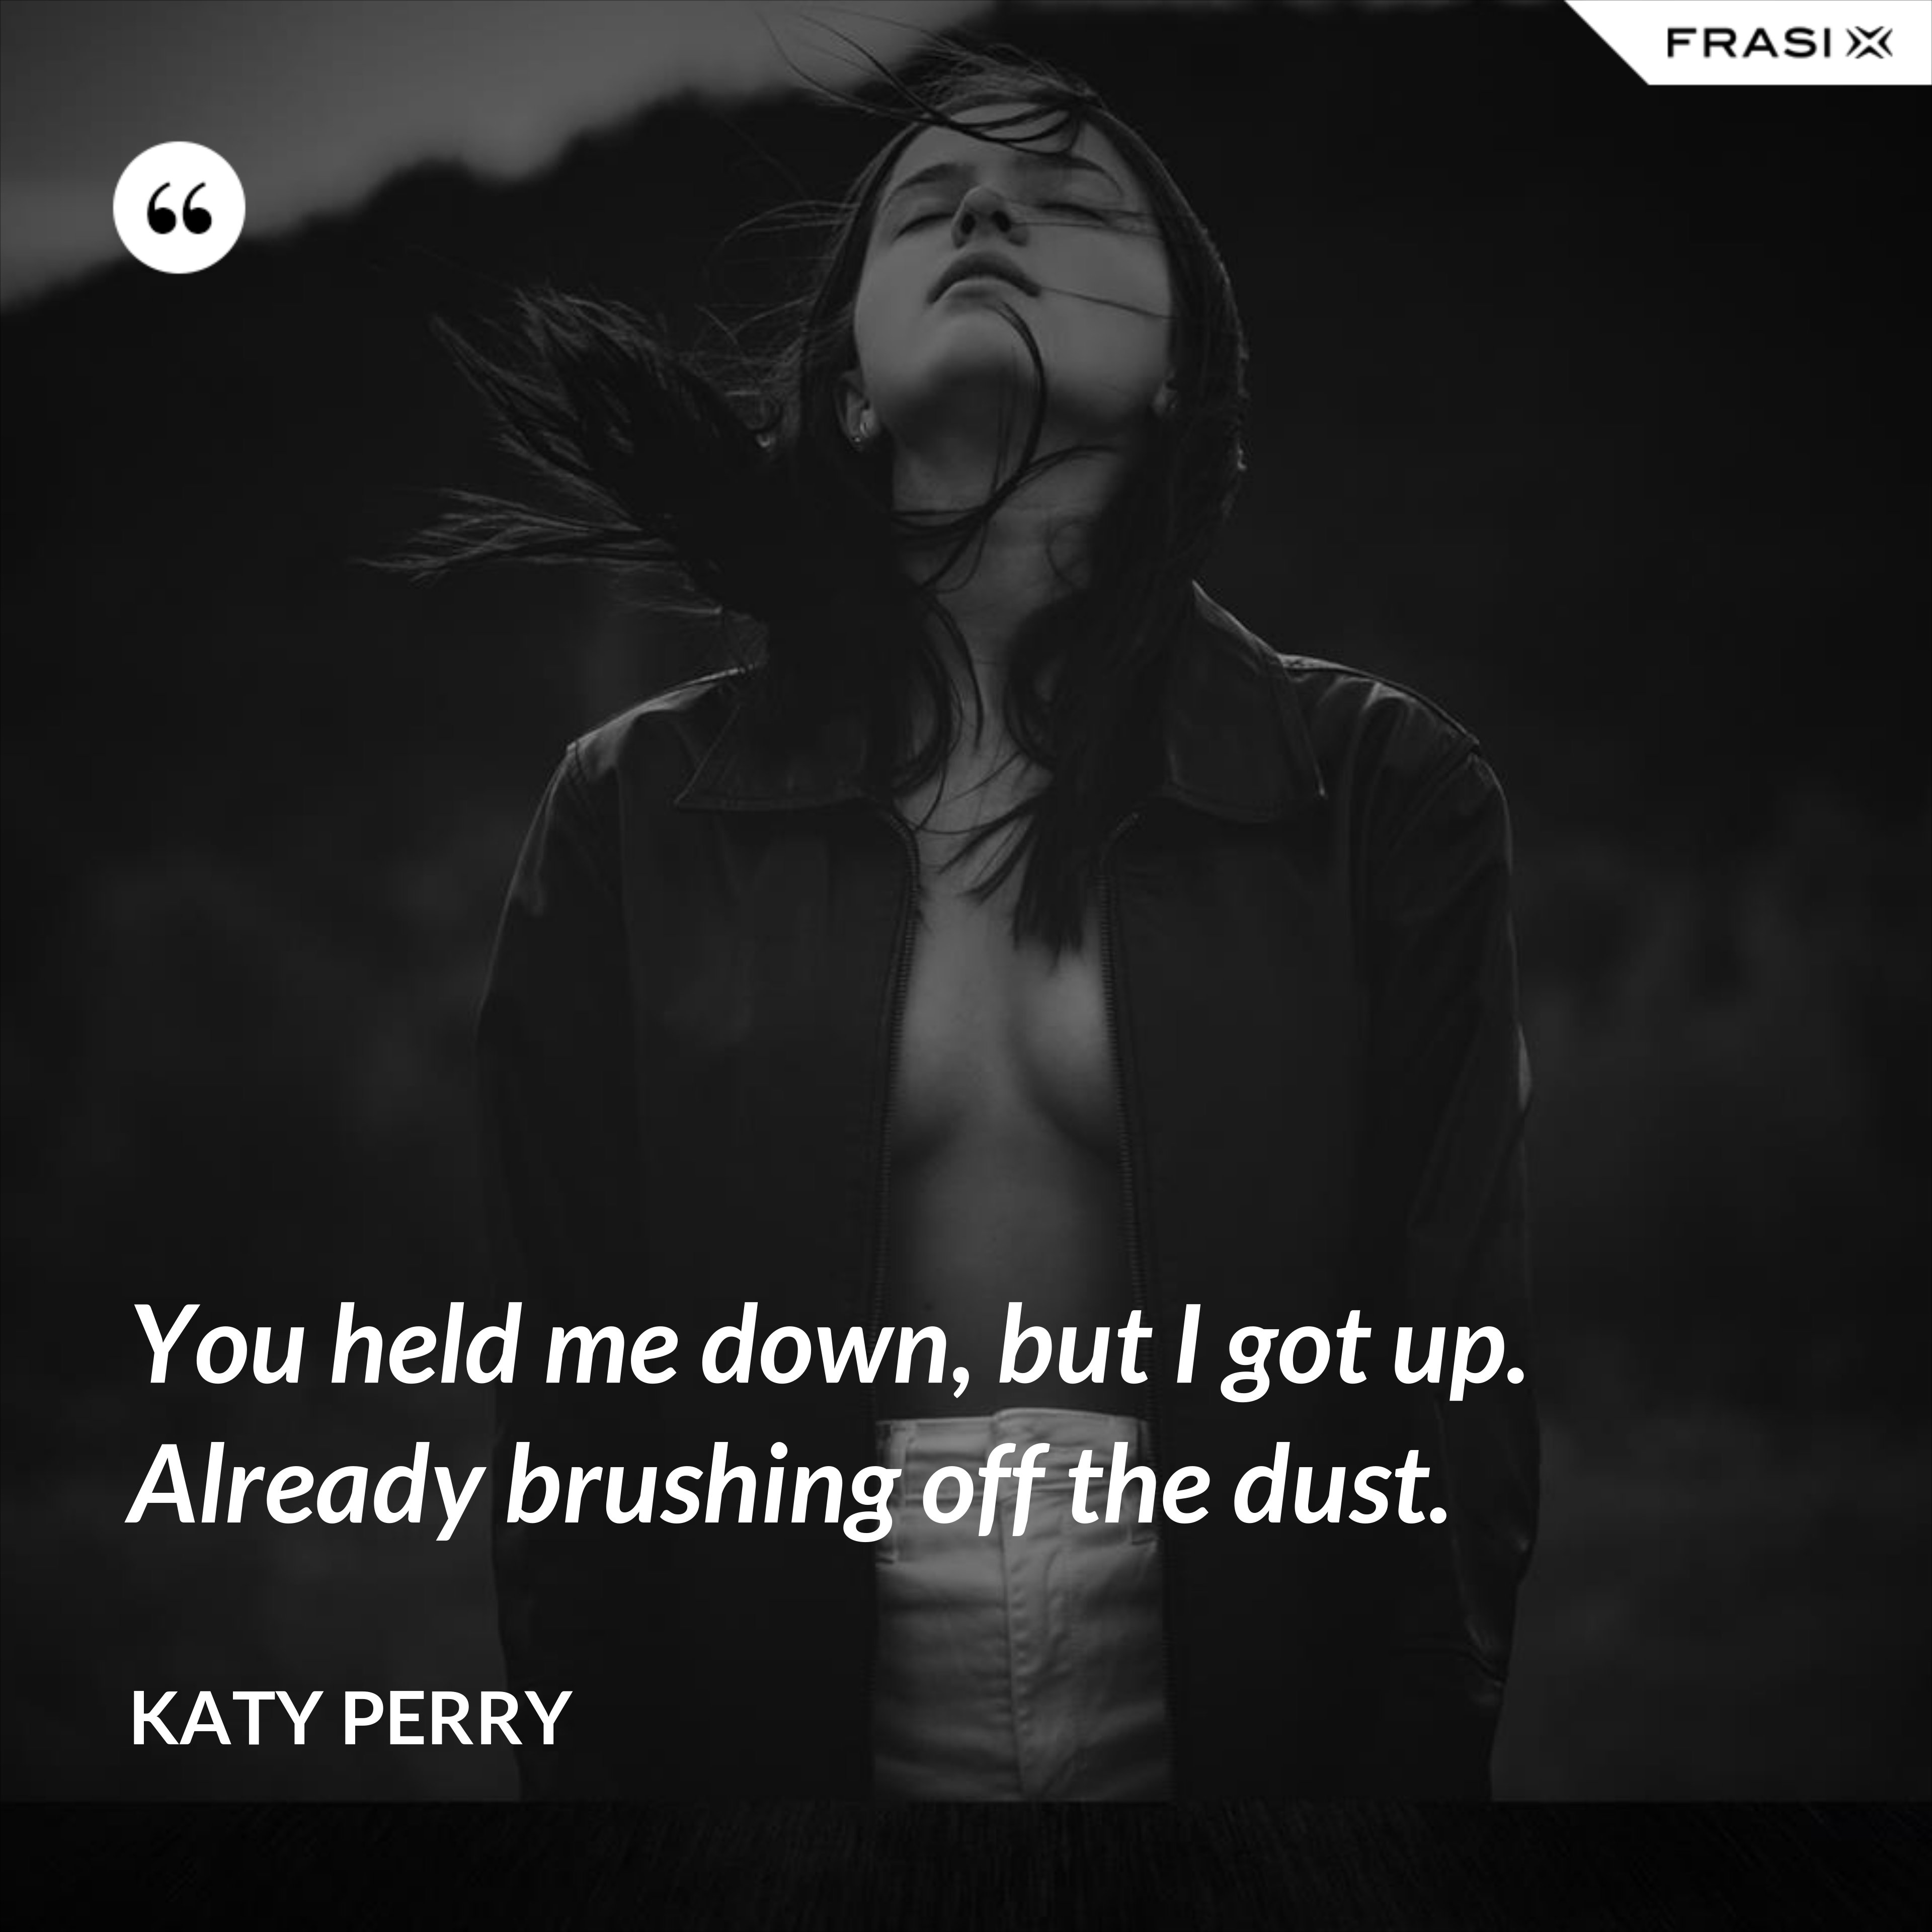 You held me down, but I got up. Already brushing off the dust. - Katy Perry